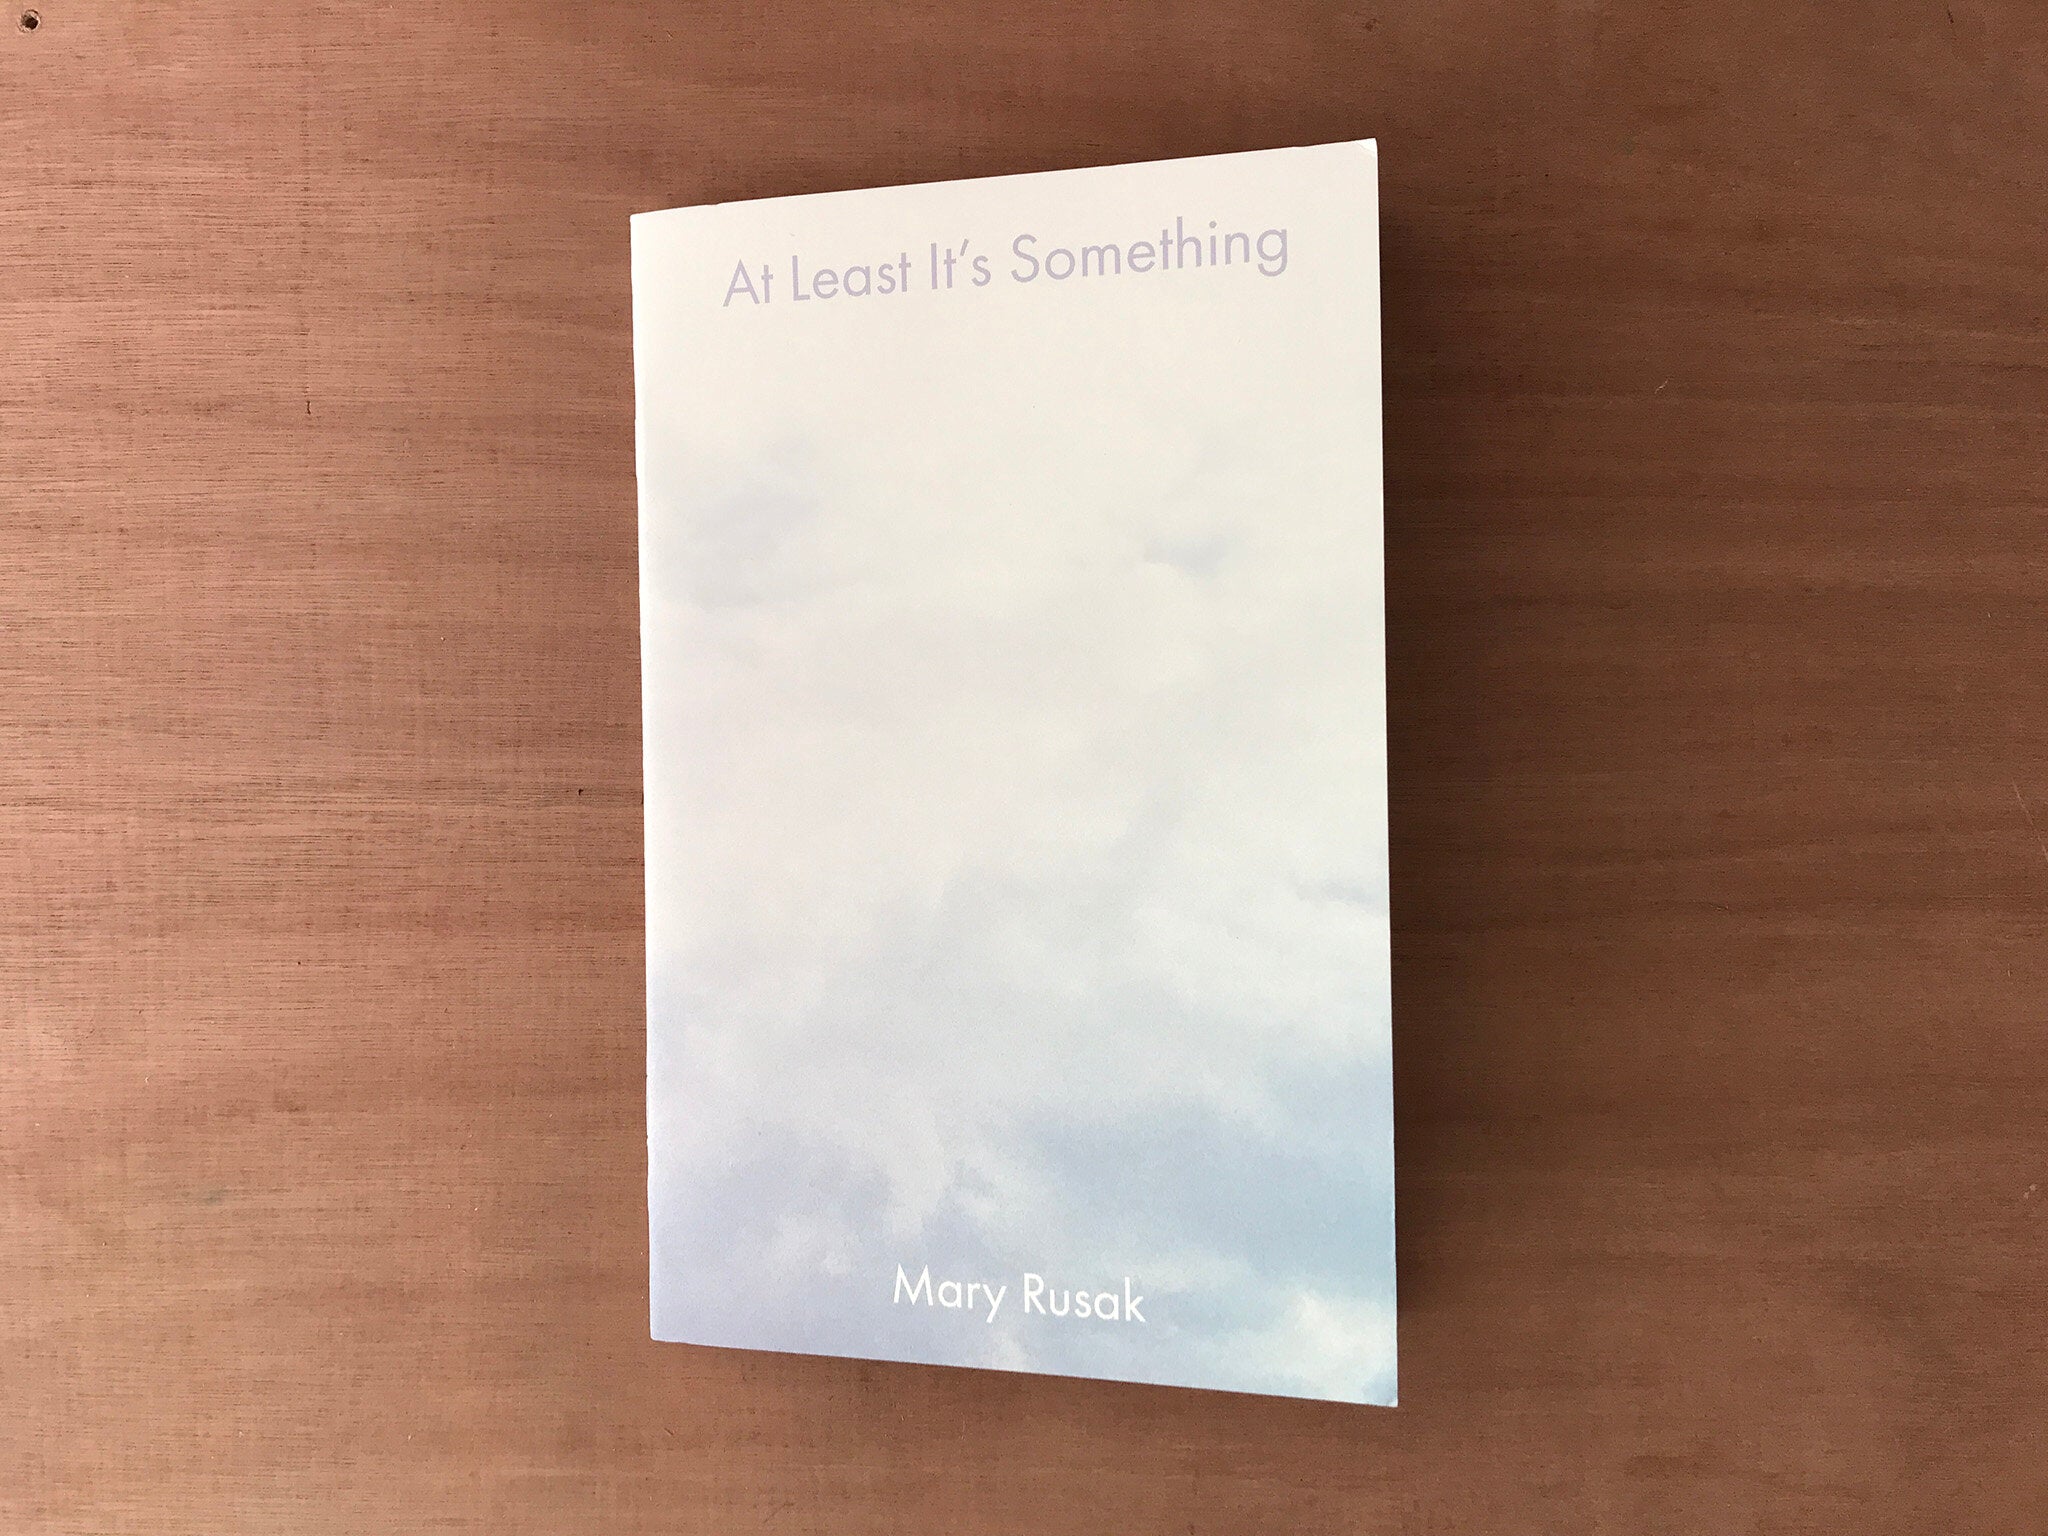 AT LEAST IT'S SOMETHING by Mary Rusak